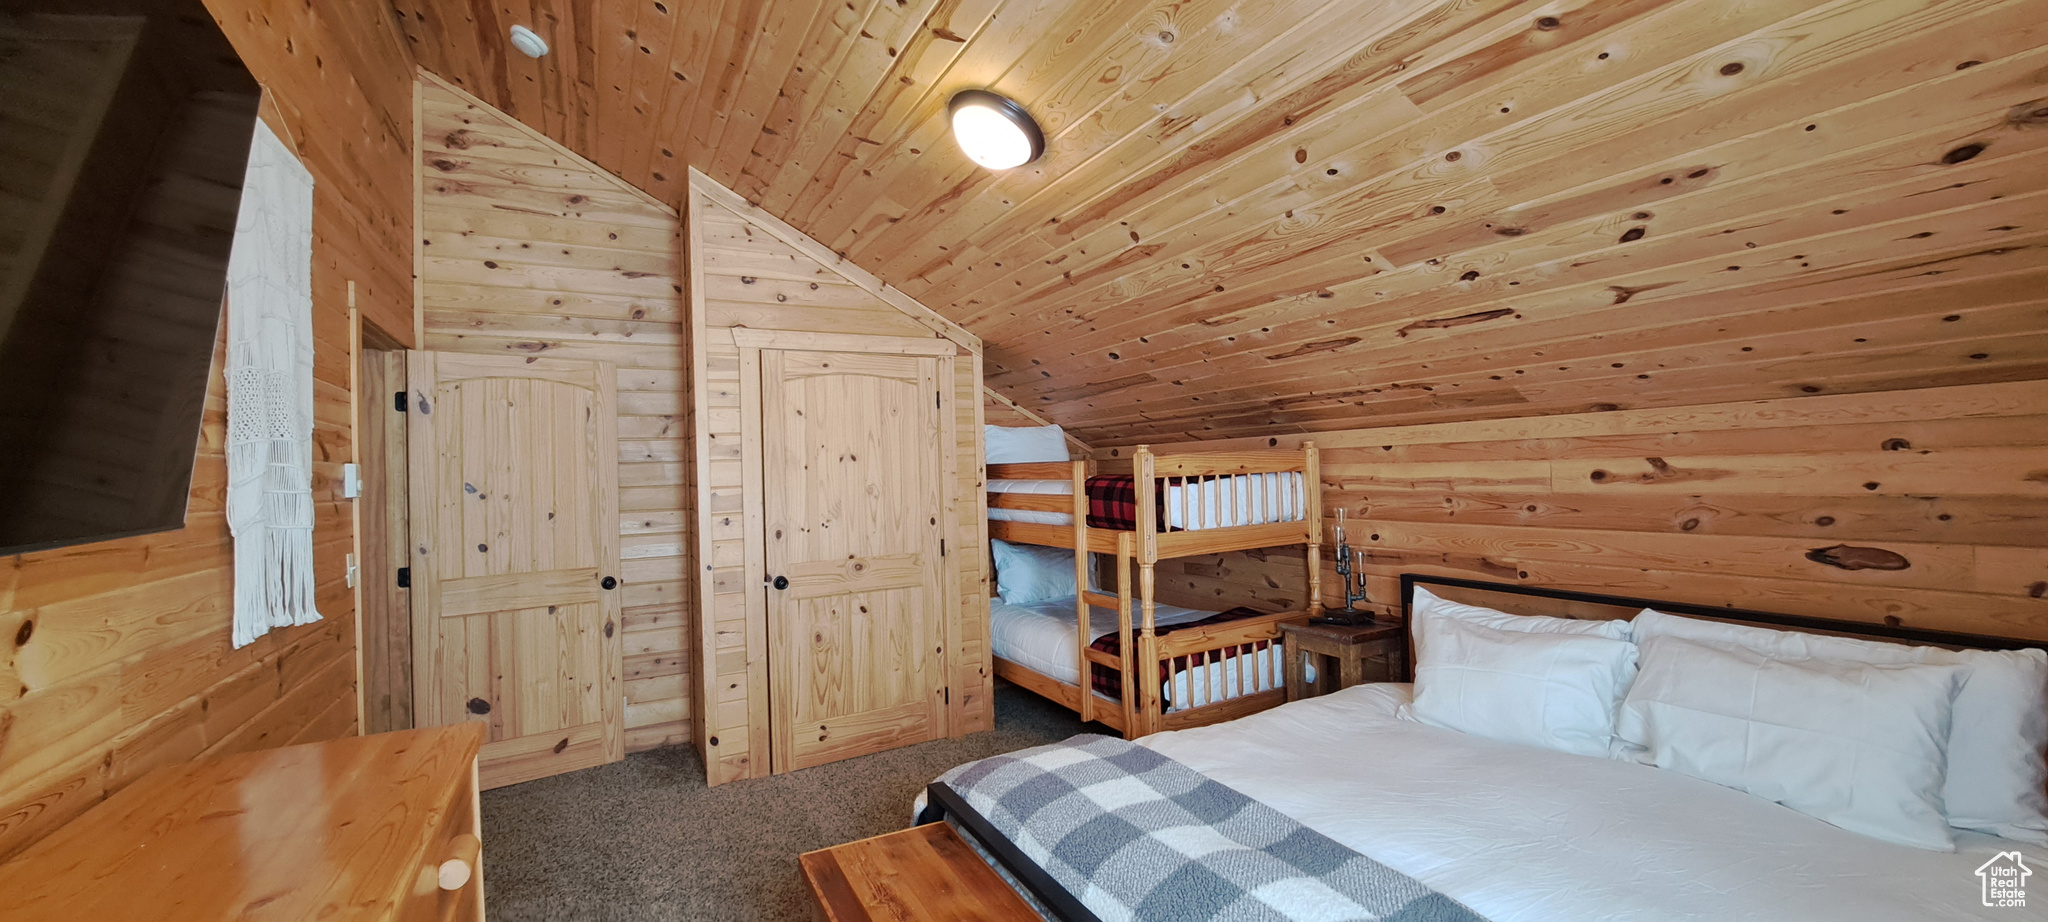 Unfurnished bedroom with wood ceiling, lofted ceiling, and wood walls